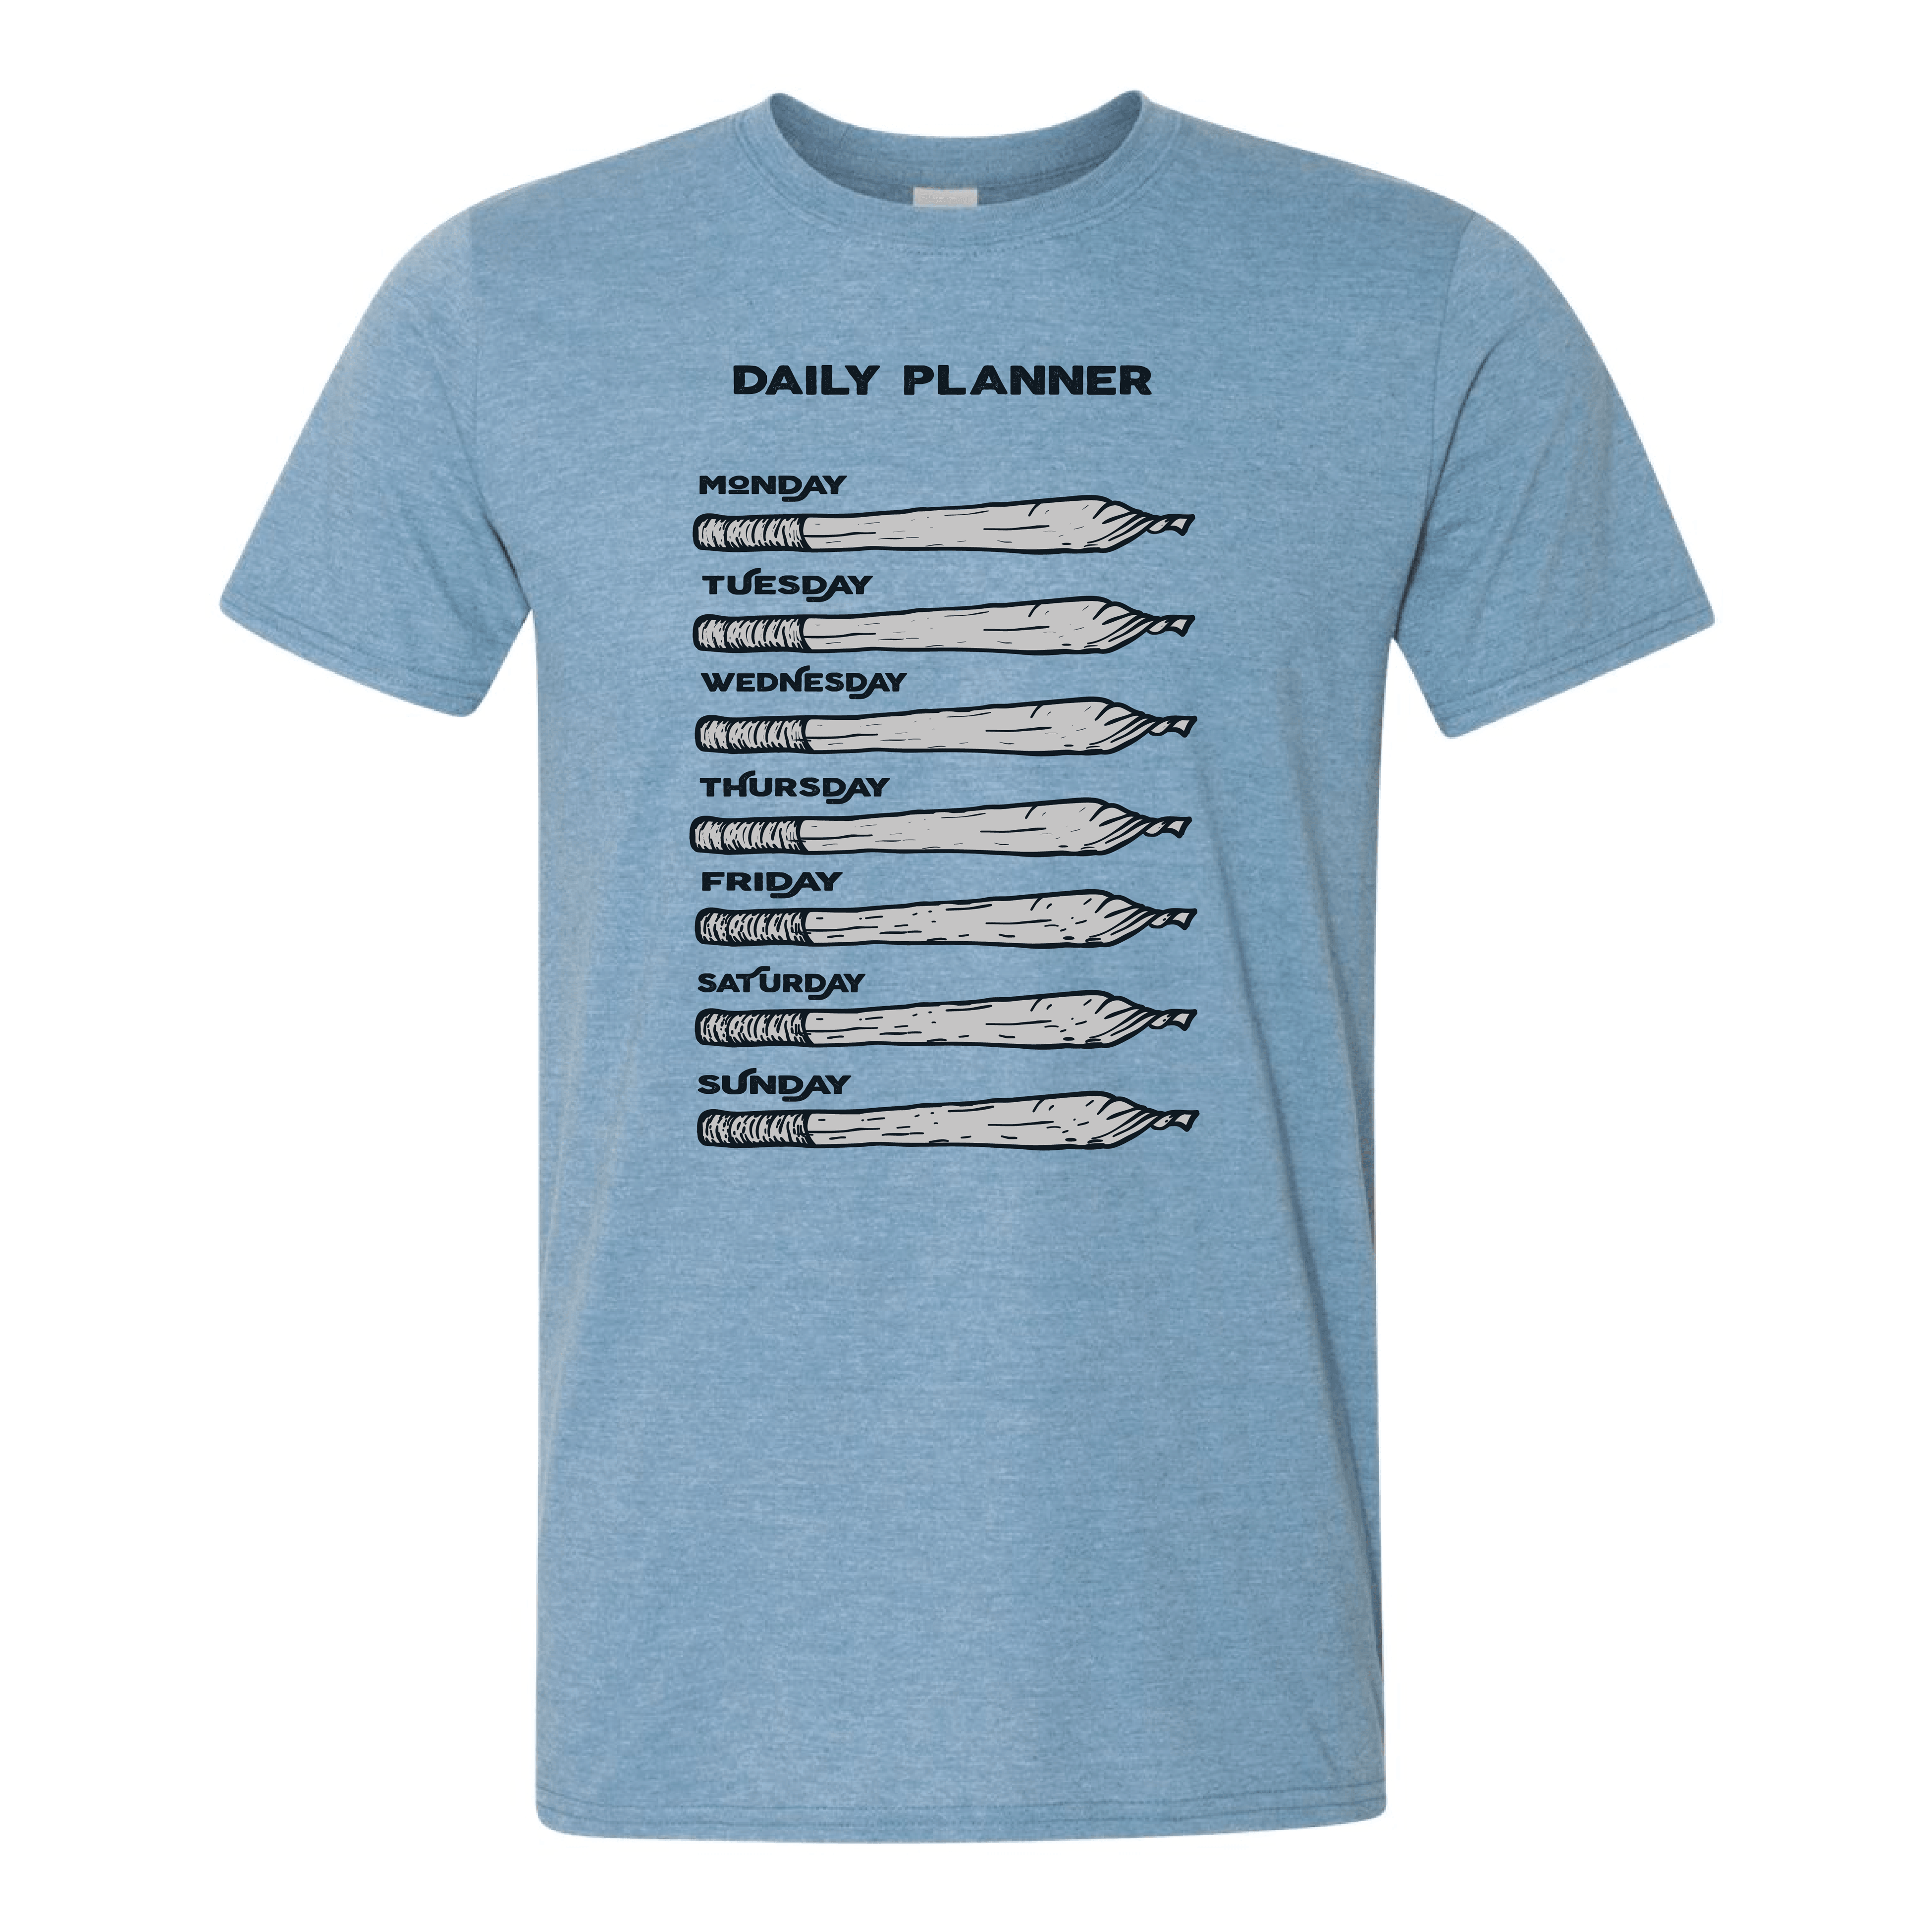 Daily Planner T-Shirt - Ales to Trails